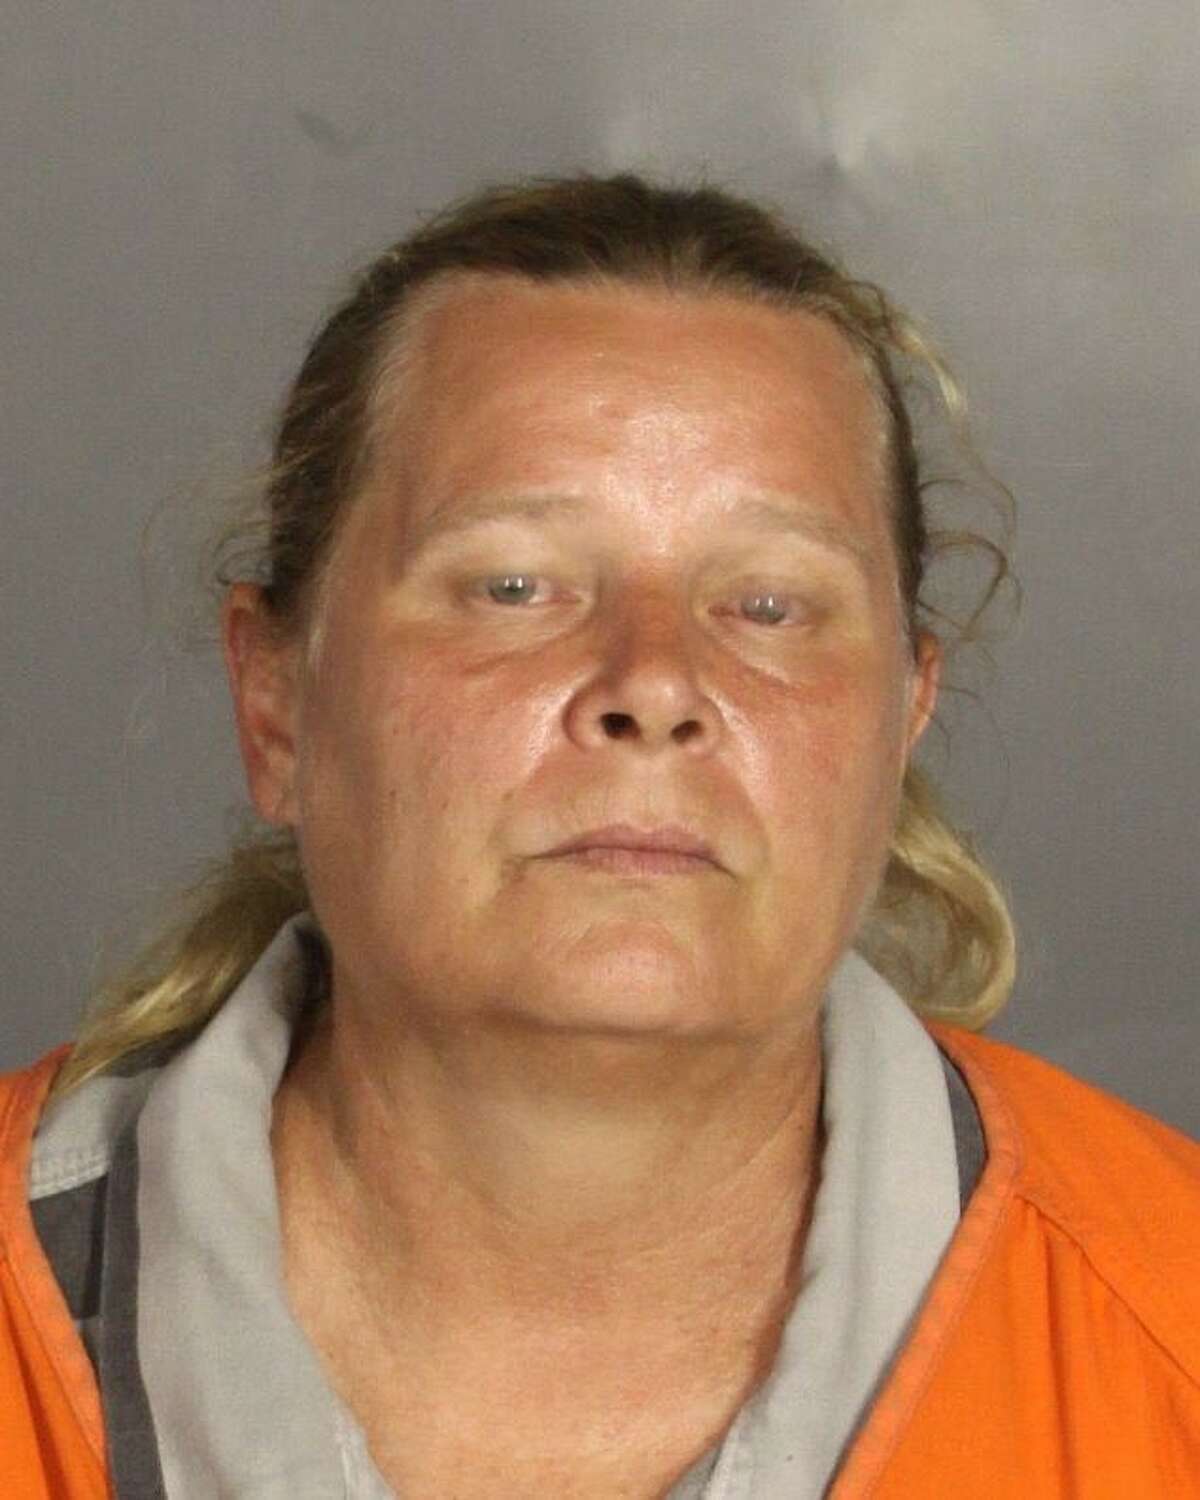 Sandra Lynch, 54, was booked May 18, 2015, and charged with engaging in organized criminal activity in connection to a shooting involving motorcycle gangs at a Twin Peaks restaurant in Waco at around noon on May 17, 2015. The shooting left nine dead and 18 injured.